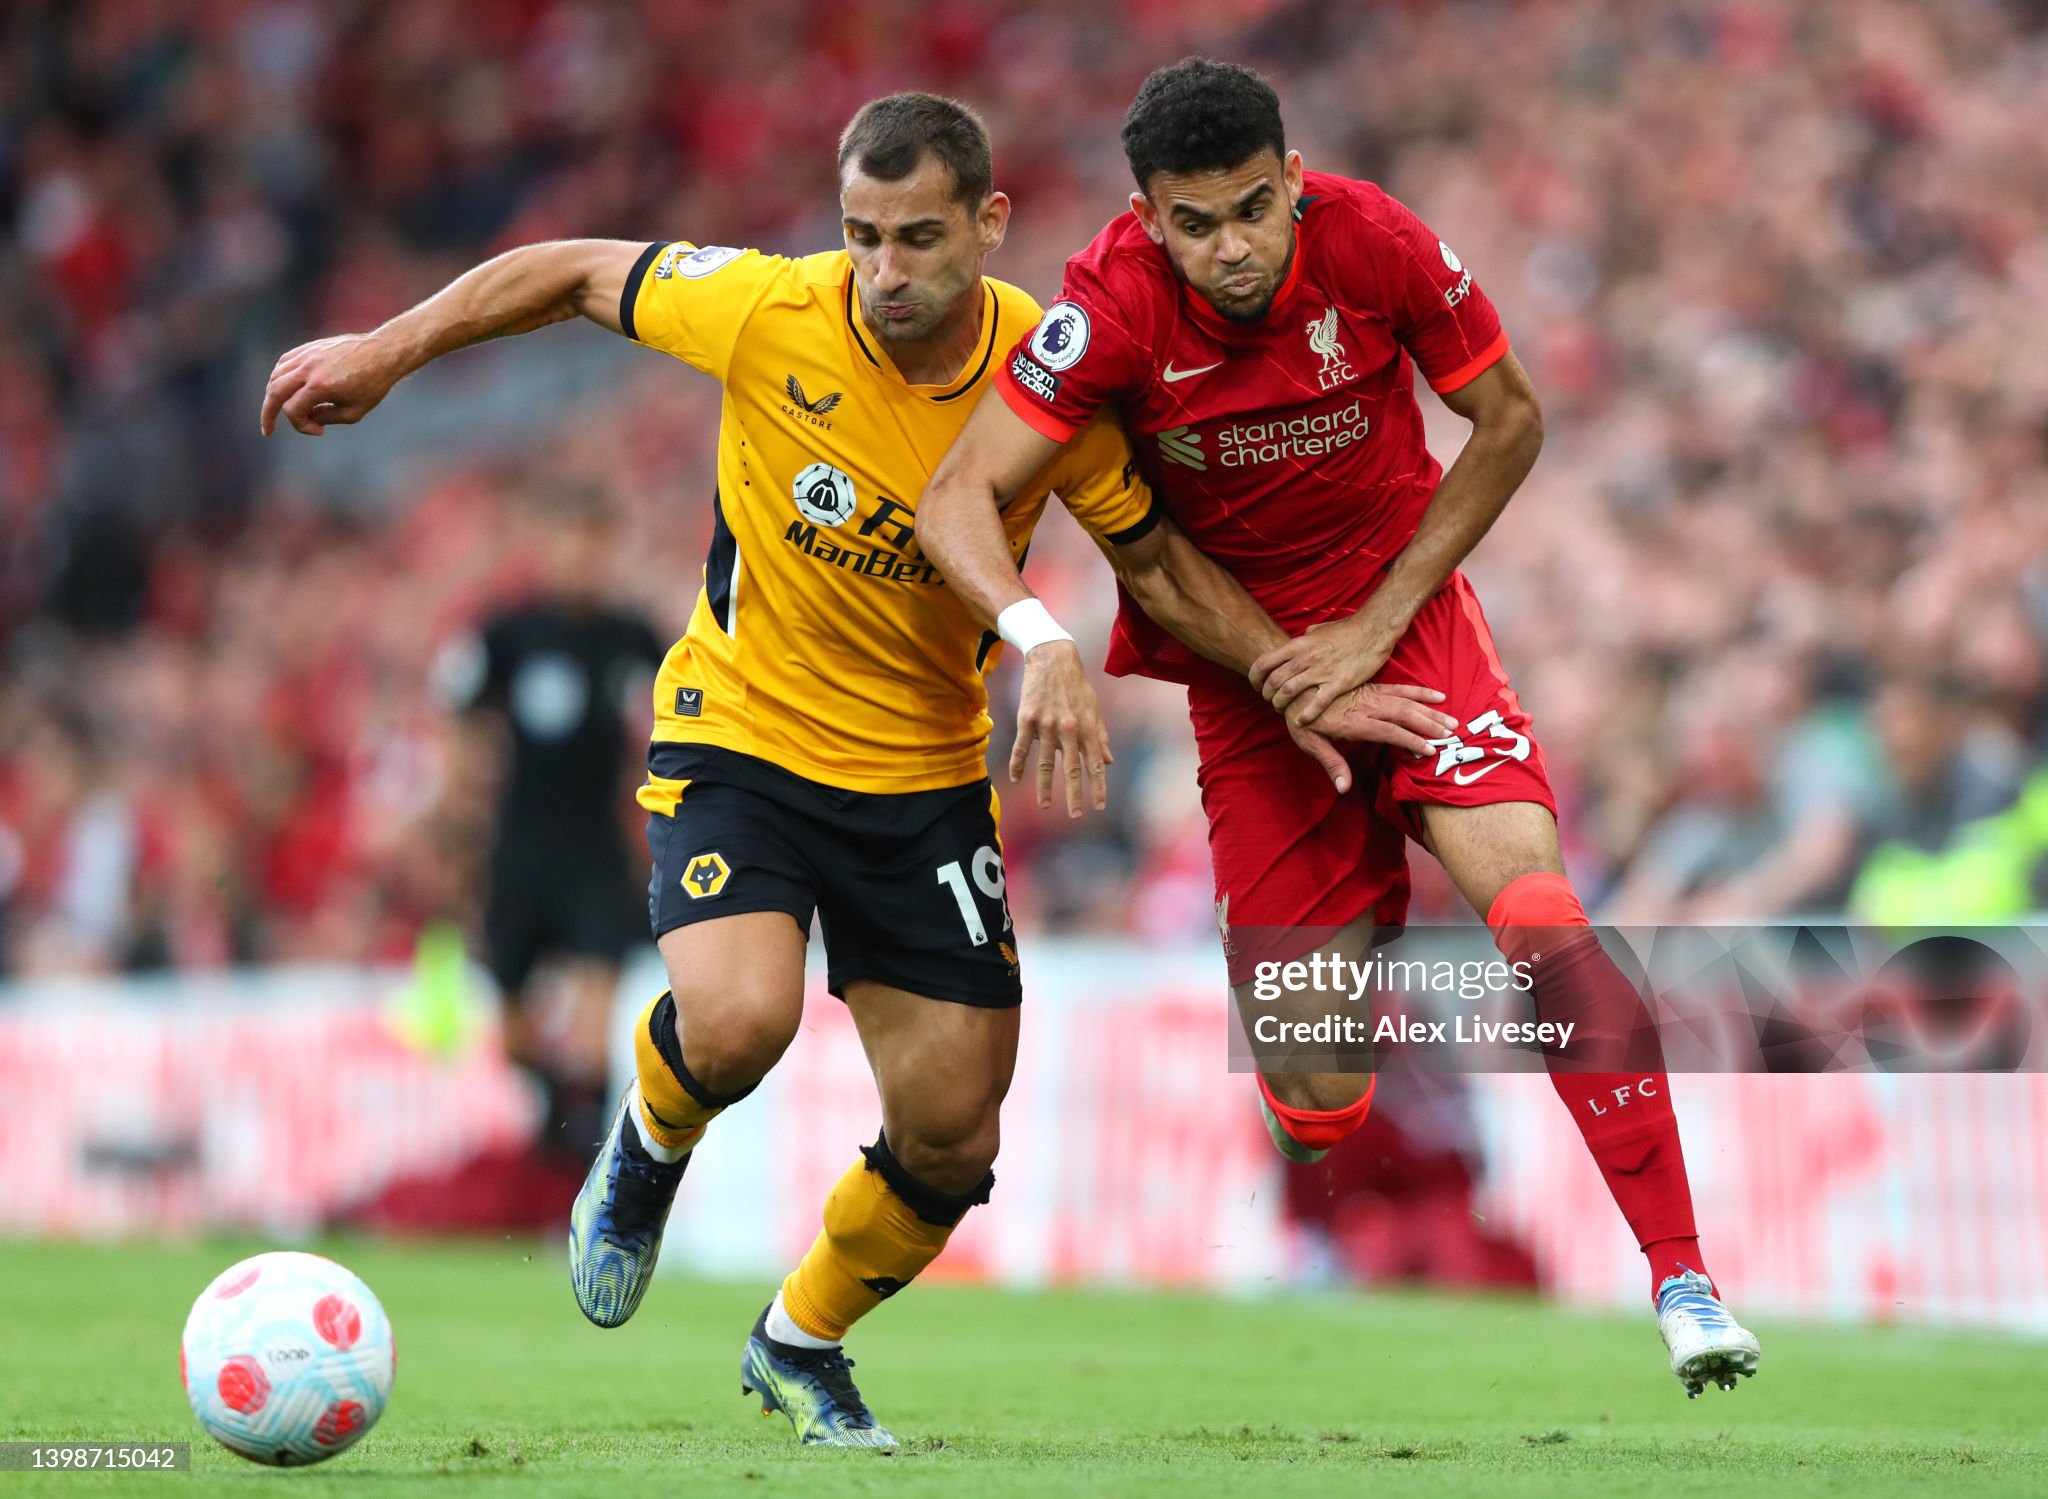 Liverpool vs Wolves preview, prediction and odds